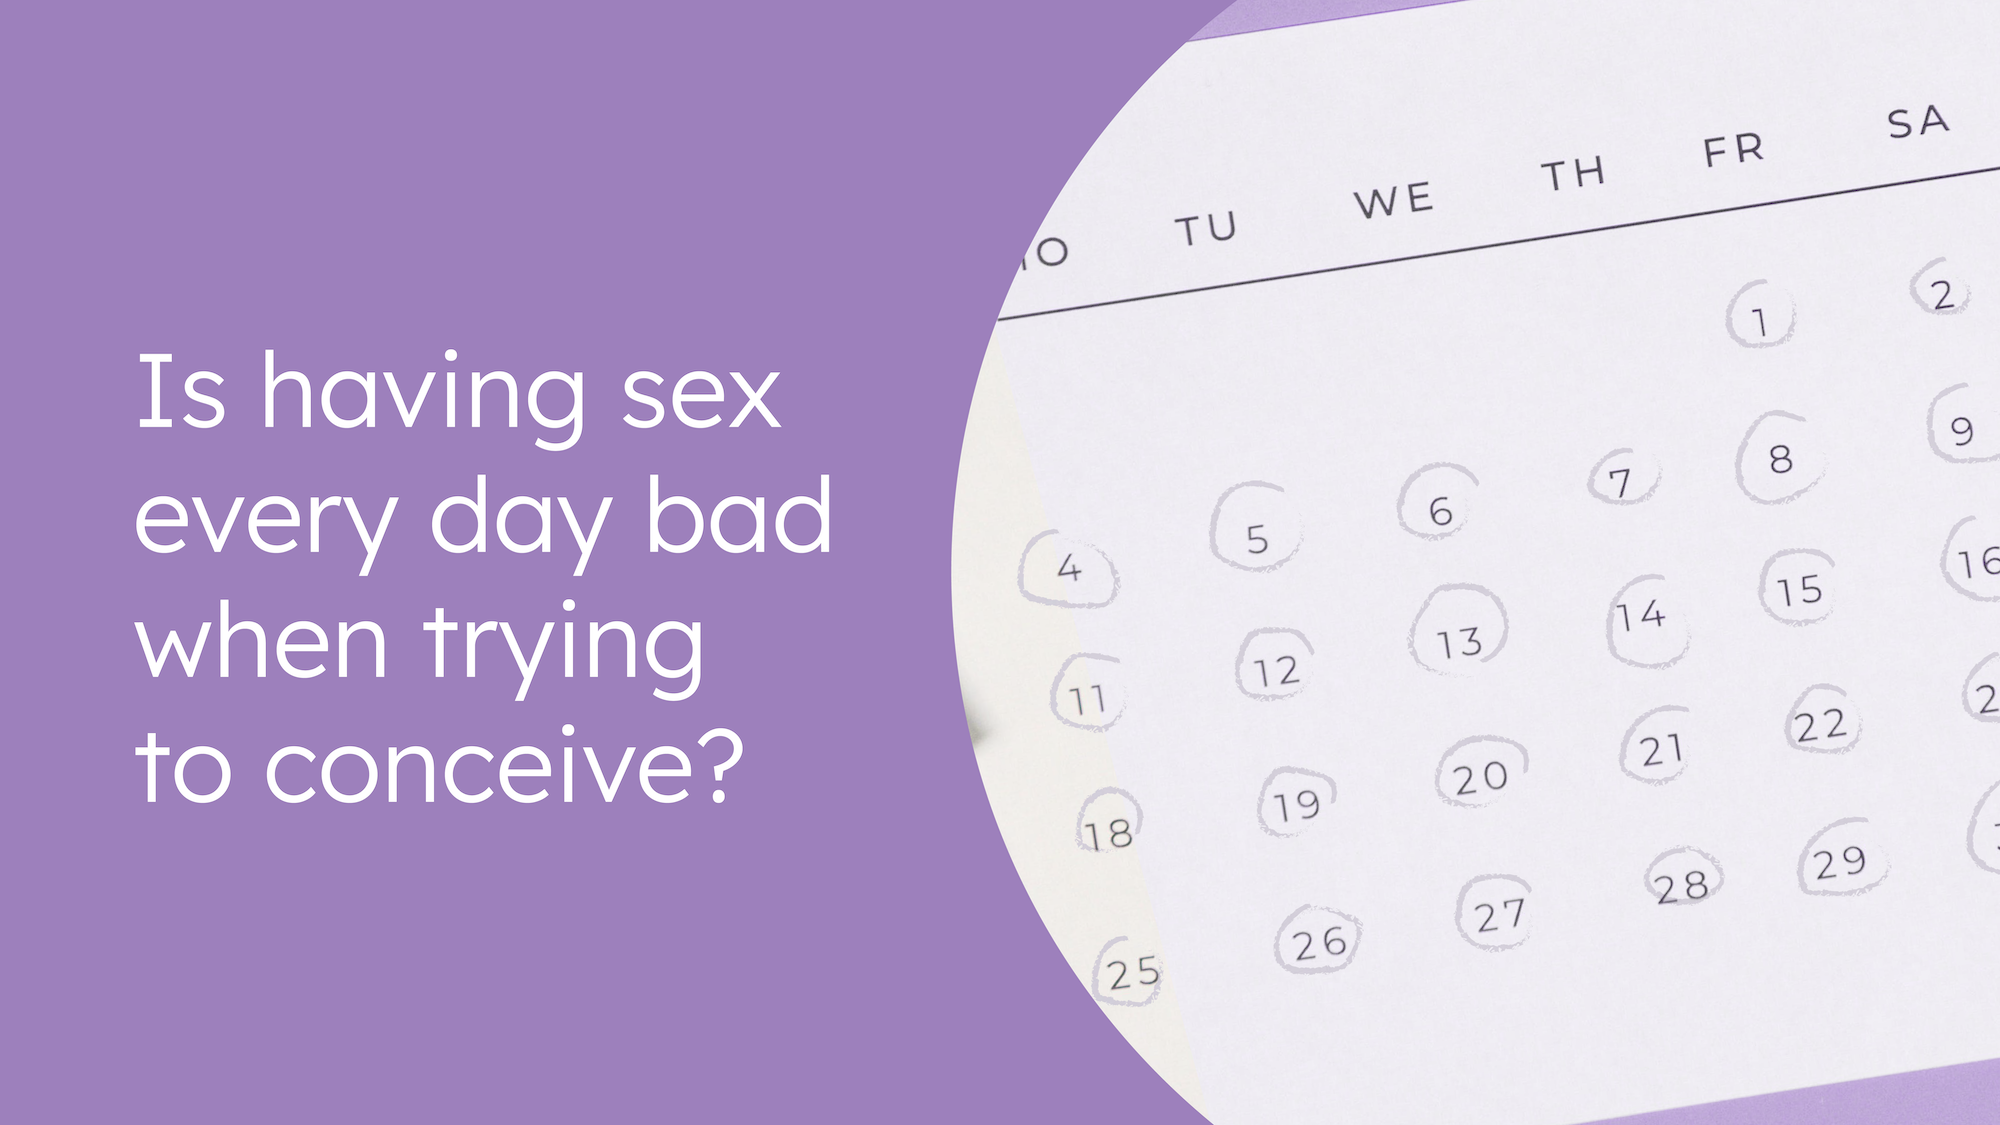 Should you have sex everyday when trying to conceive? Here's what